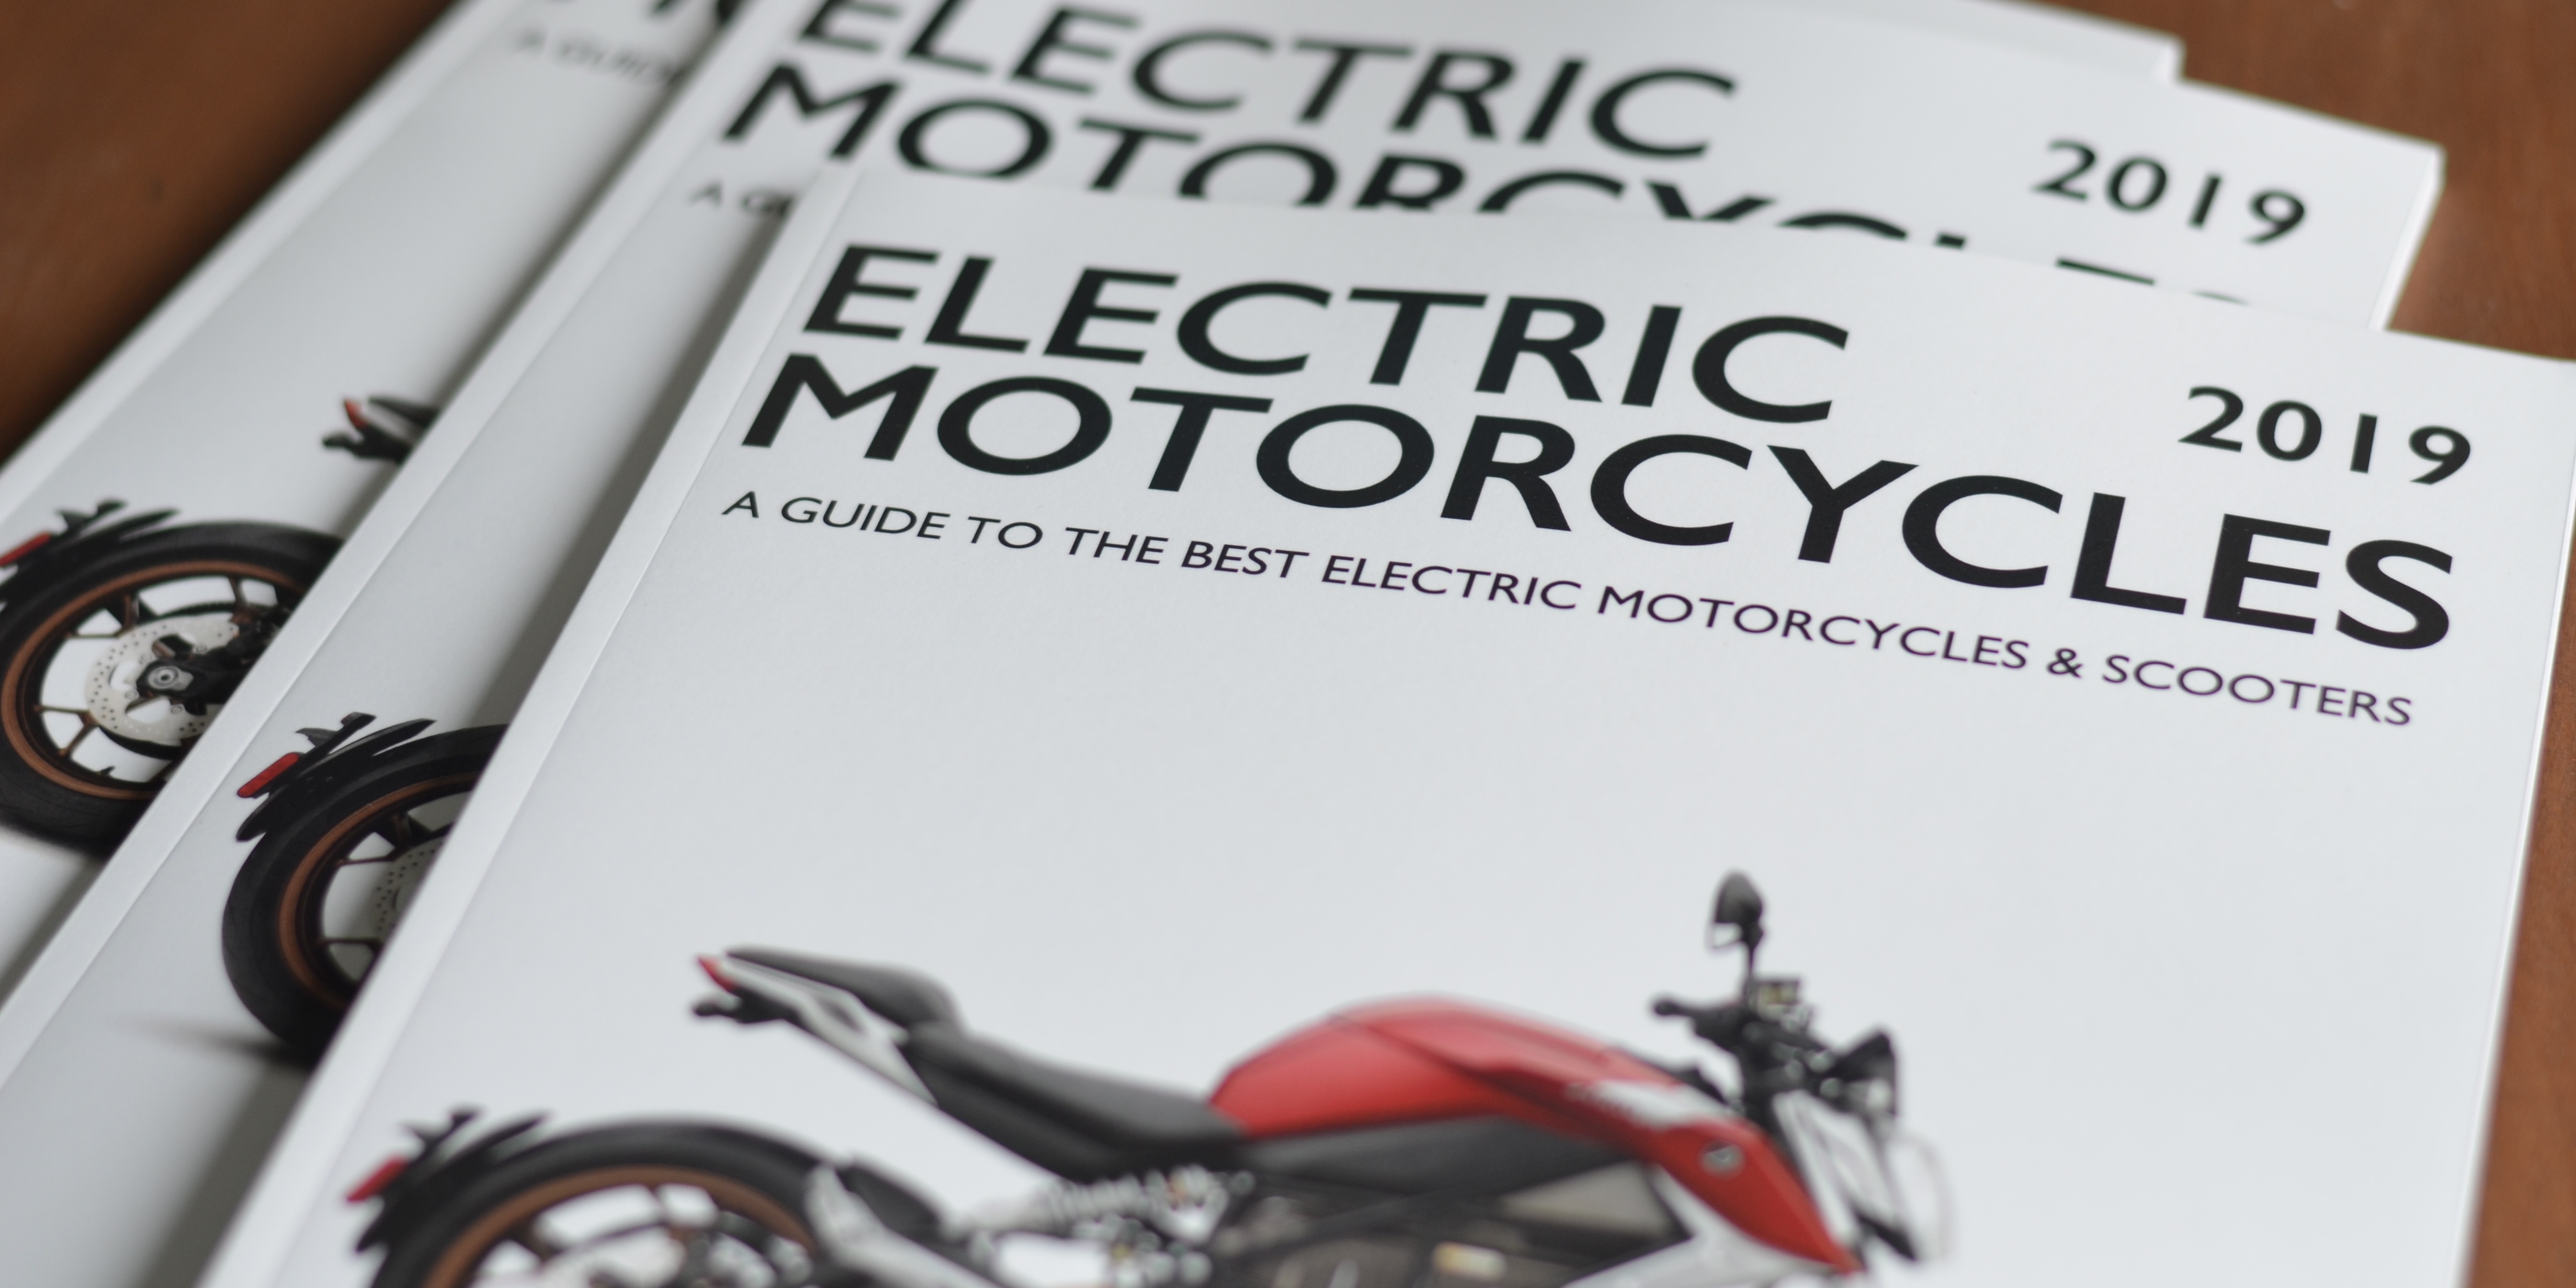 I wrote a new book about electric motorcycles, here are the top 5 e-moto’s of 2019